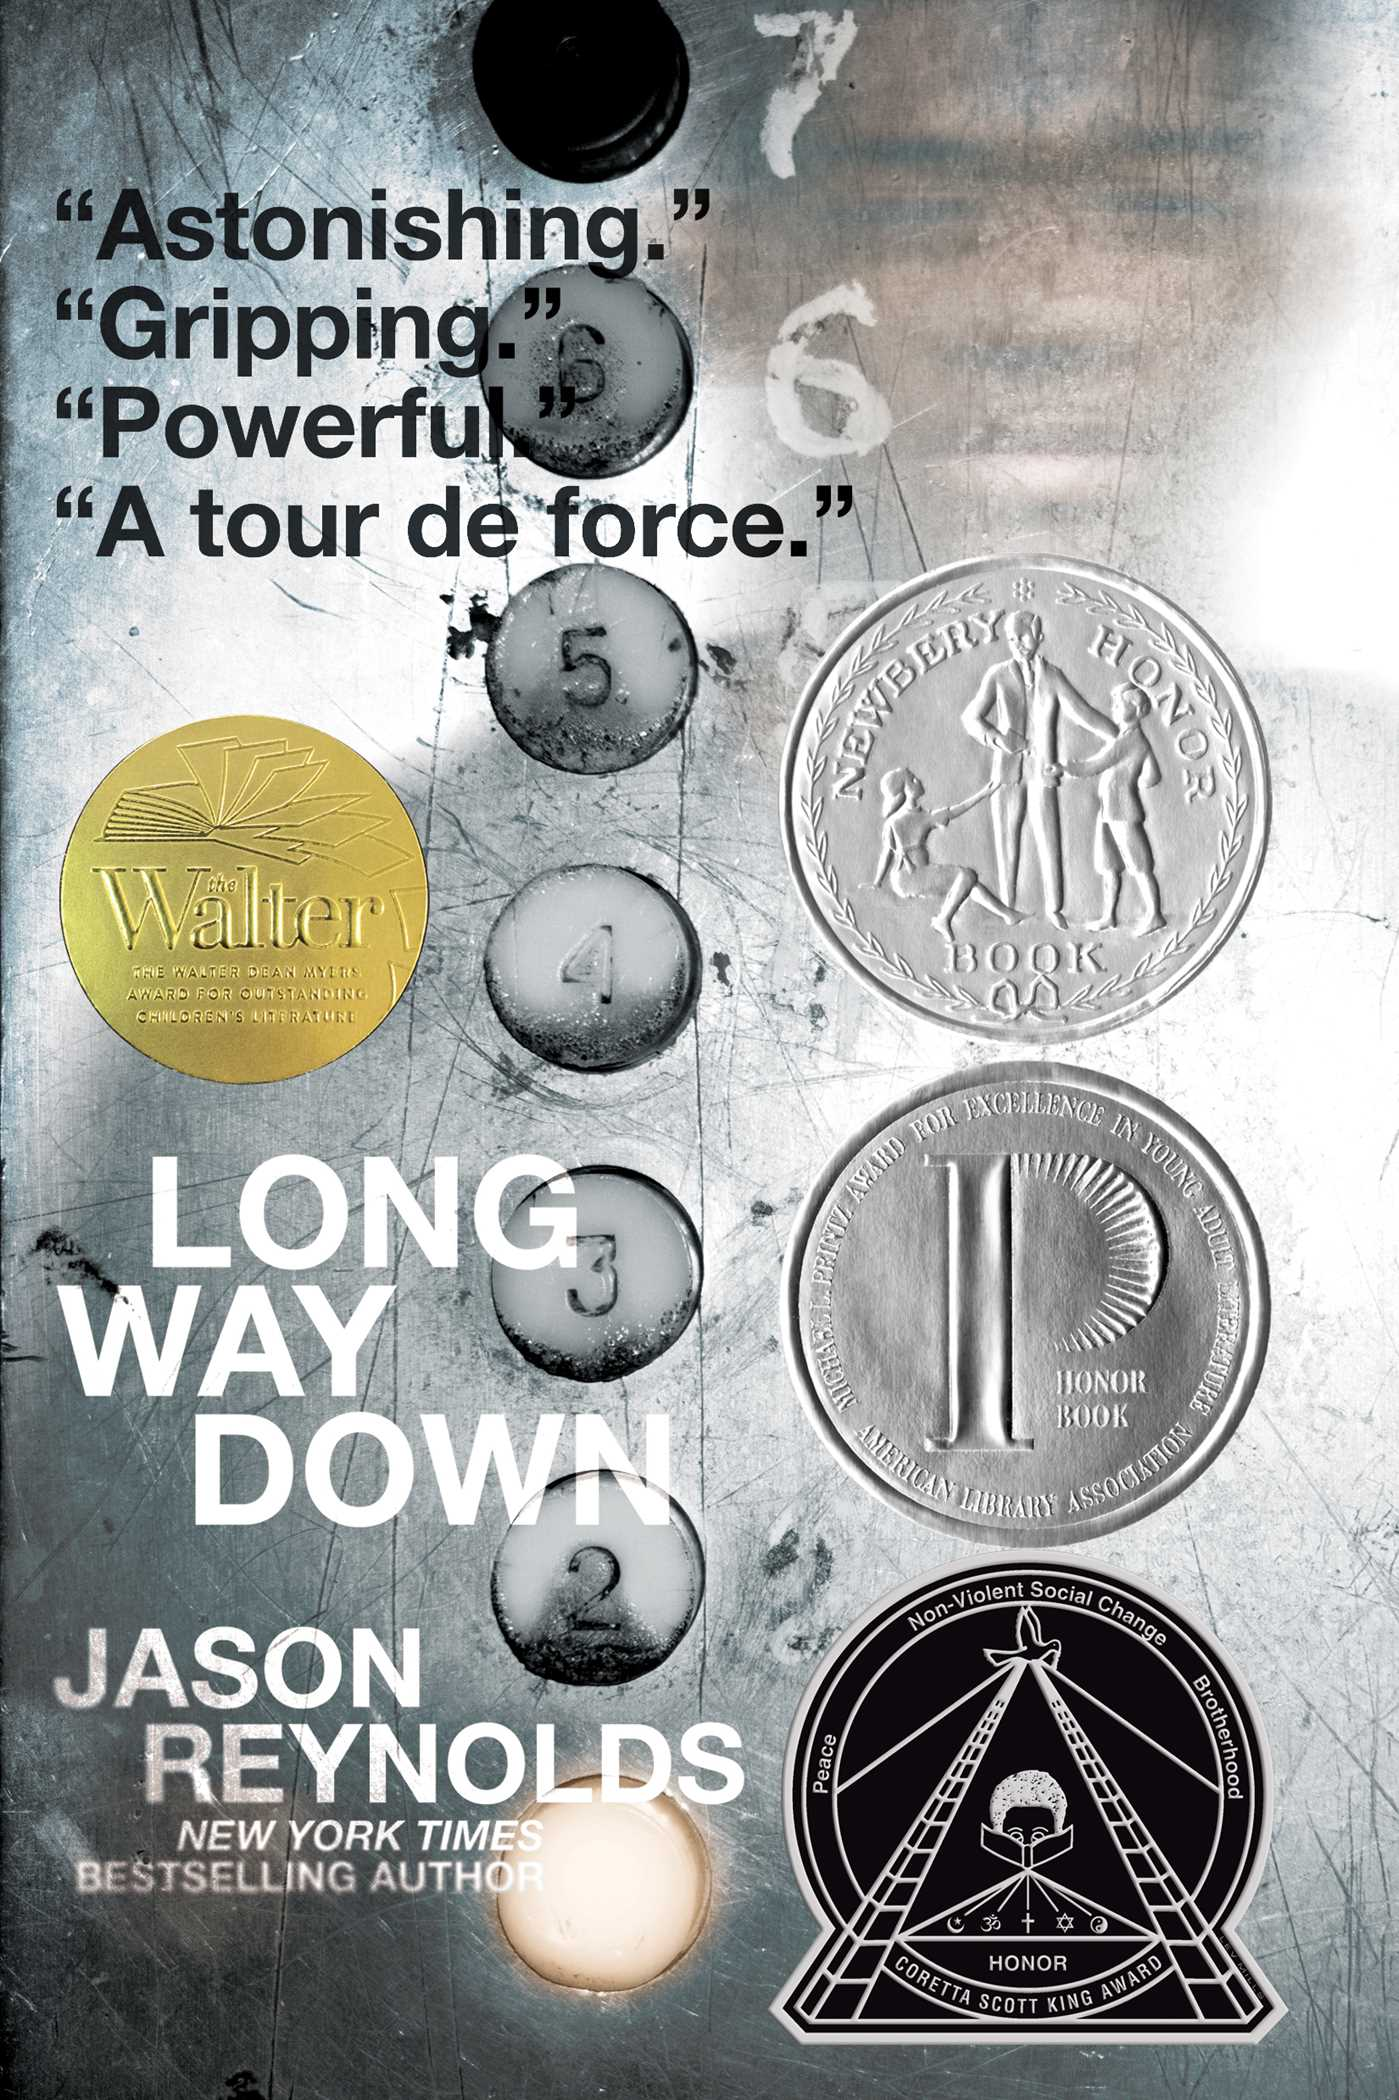 The cover of Long Way Down by Jason Reynolds. 
A grungy elevator centered on the floor number buttons in a straight line. The 1st floor button is lit and a reflection of a young Back boy is shown.